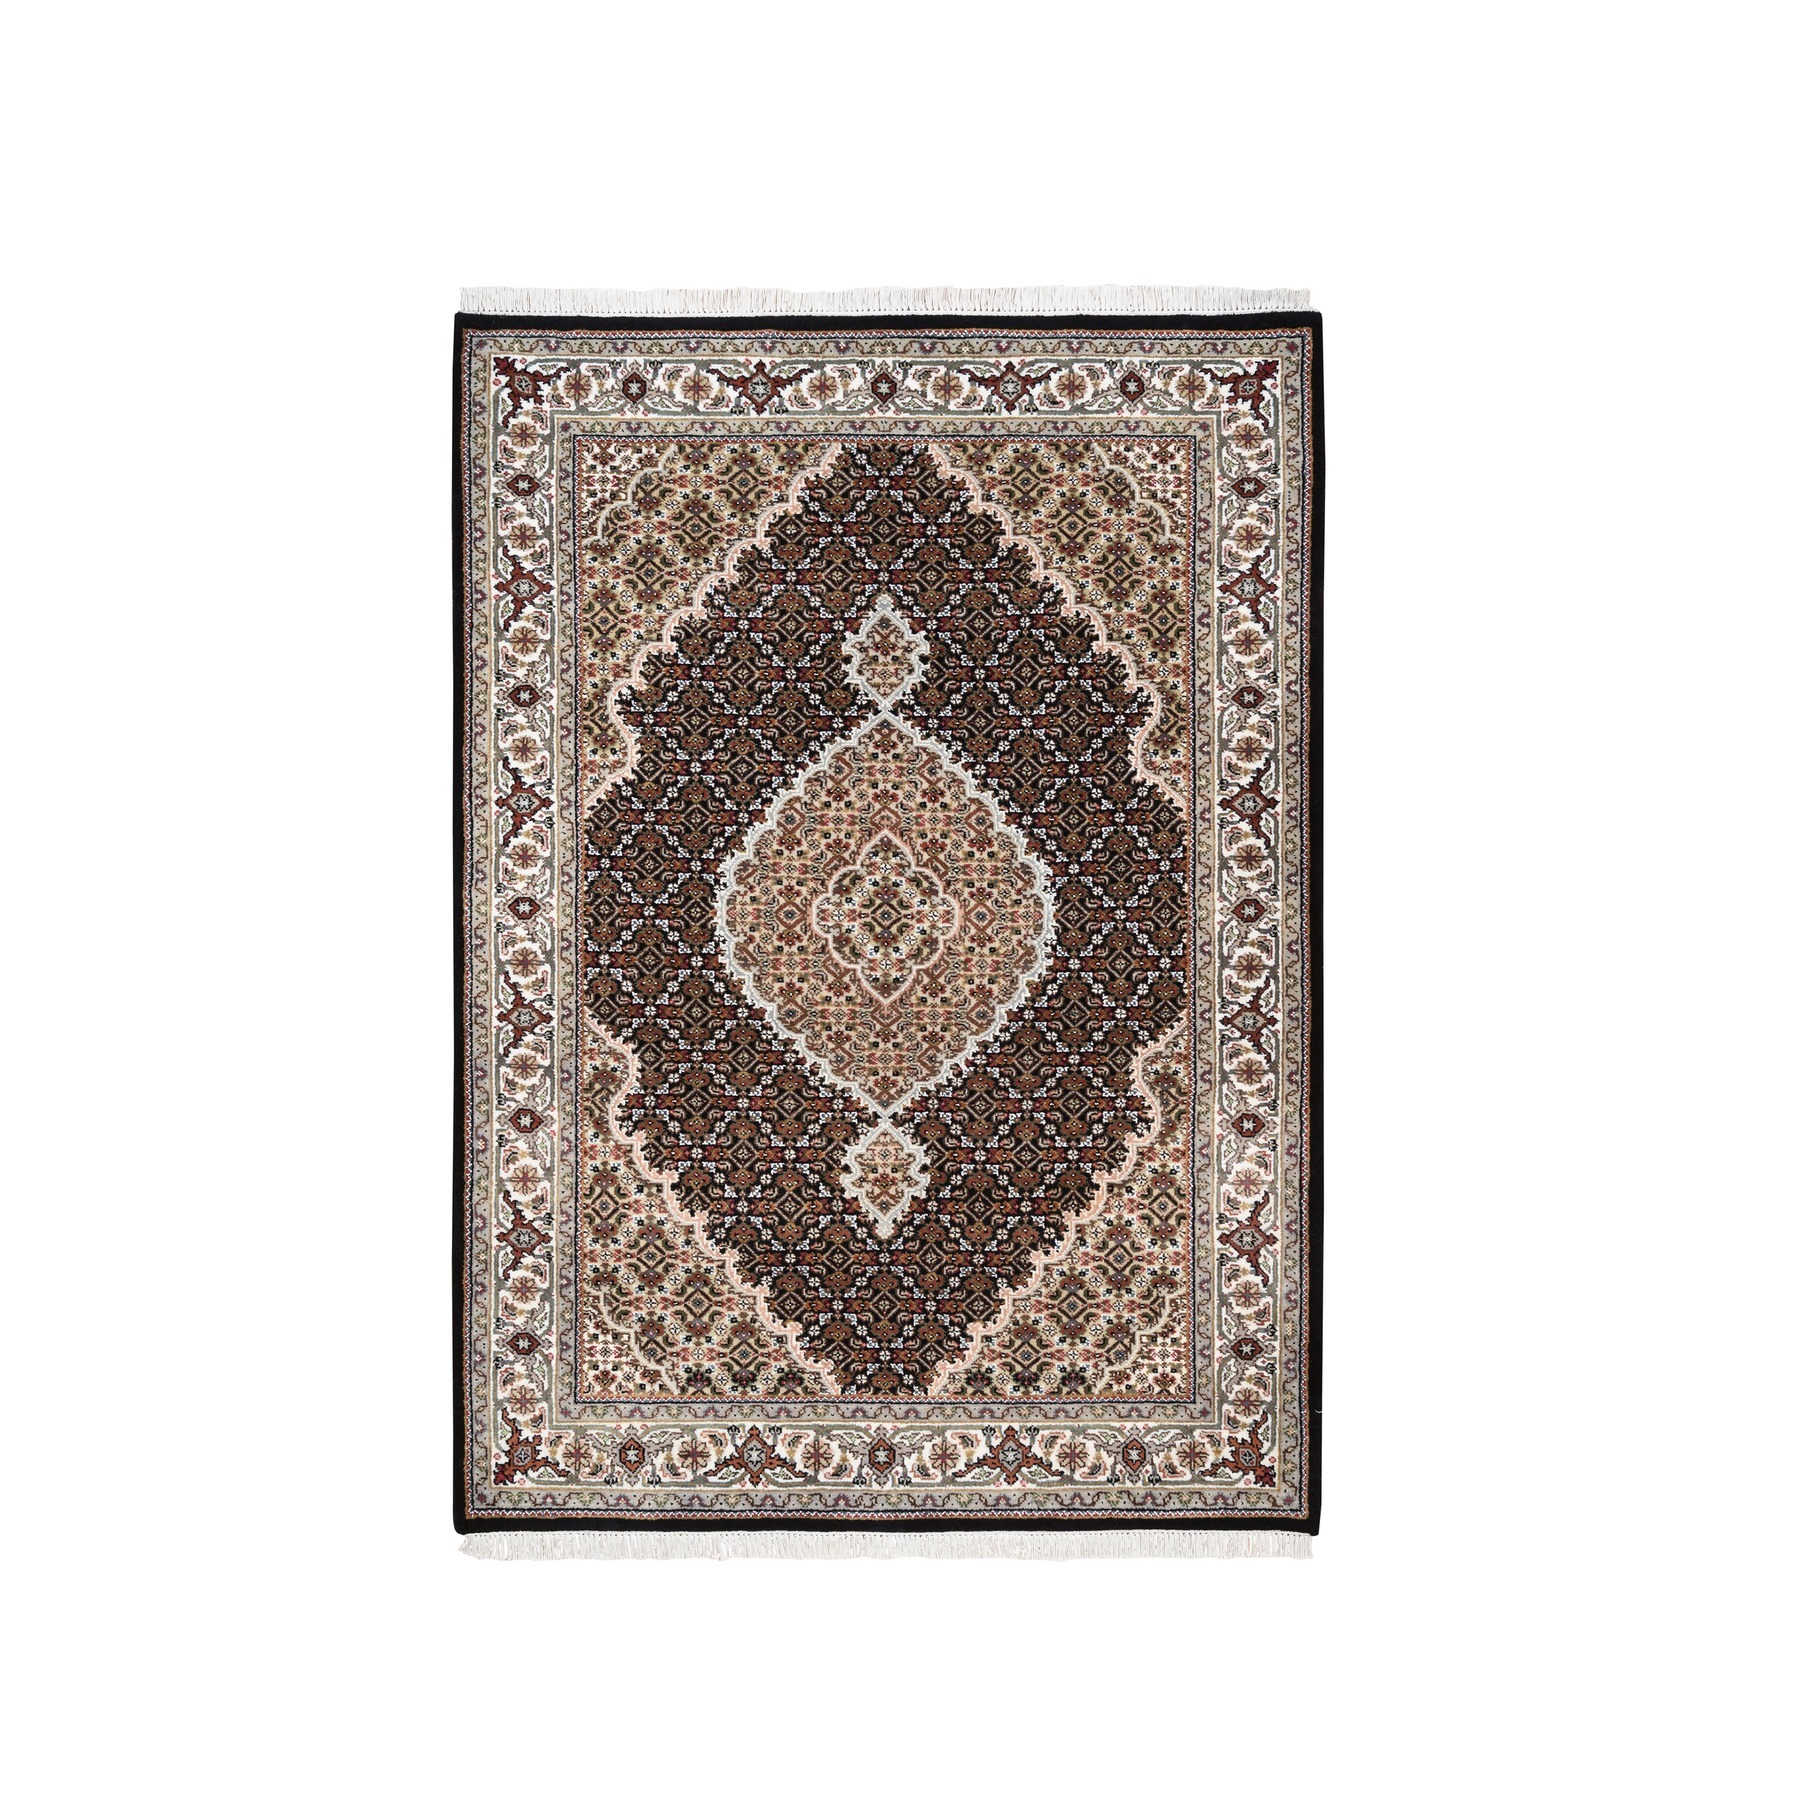 Pirniakan Collection Hand Knotted Black Rug No: 1125138